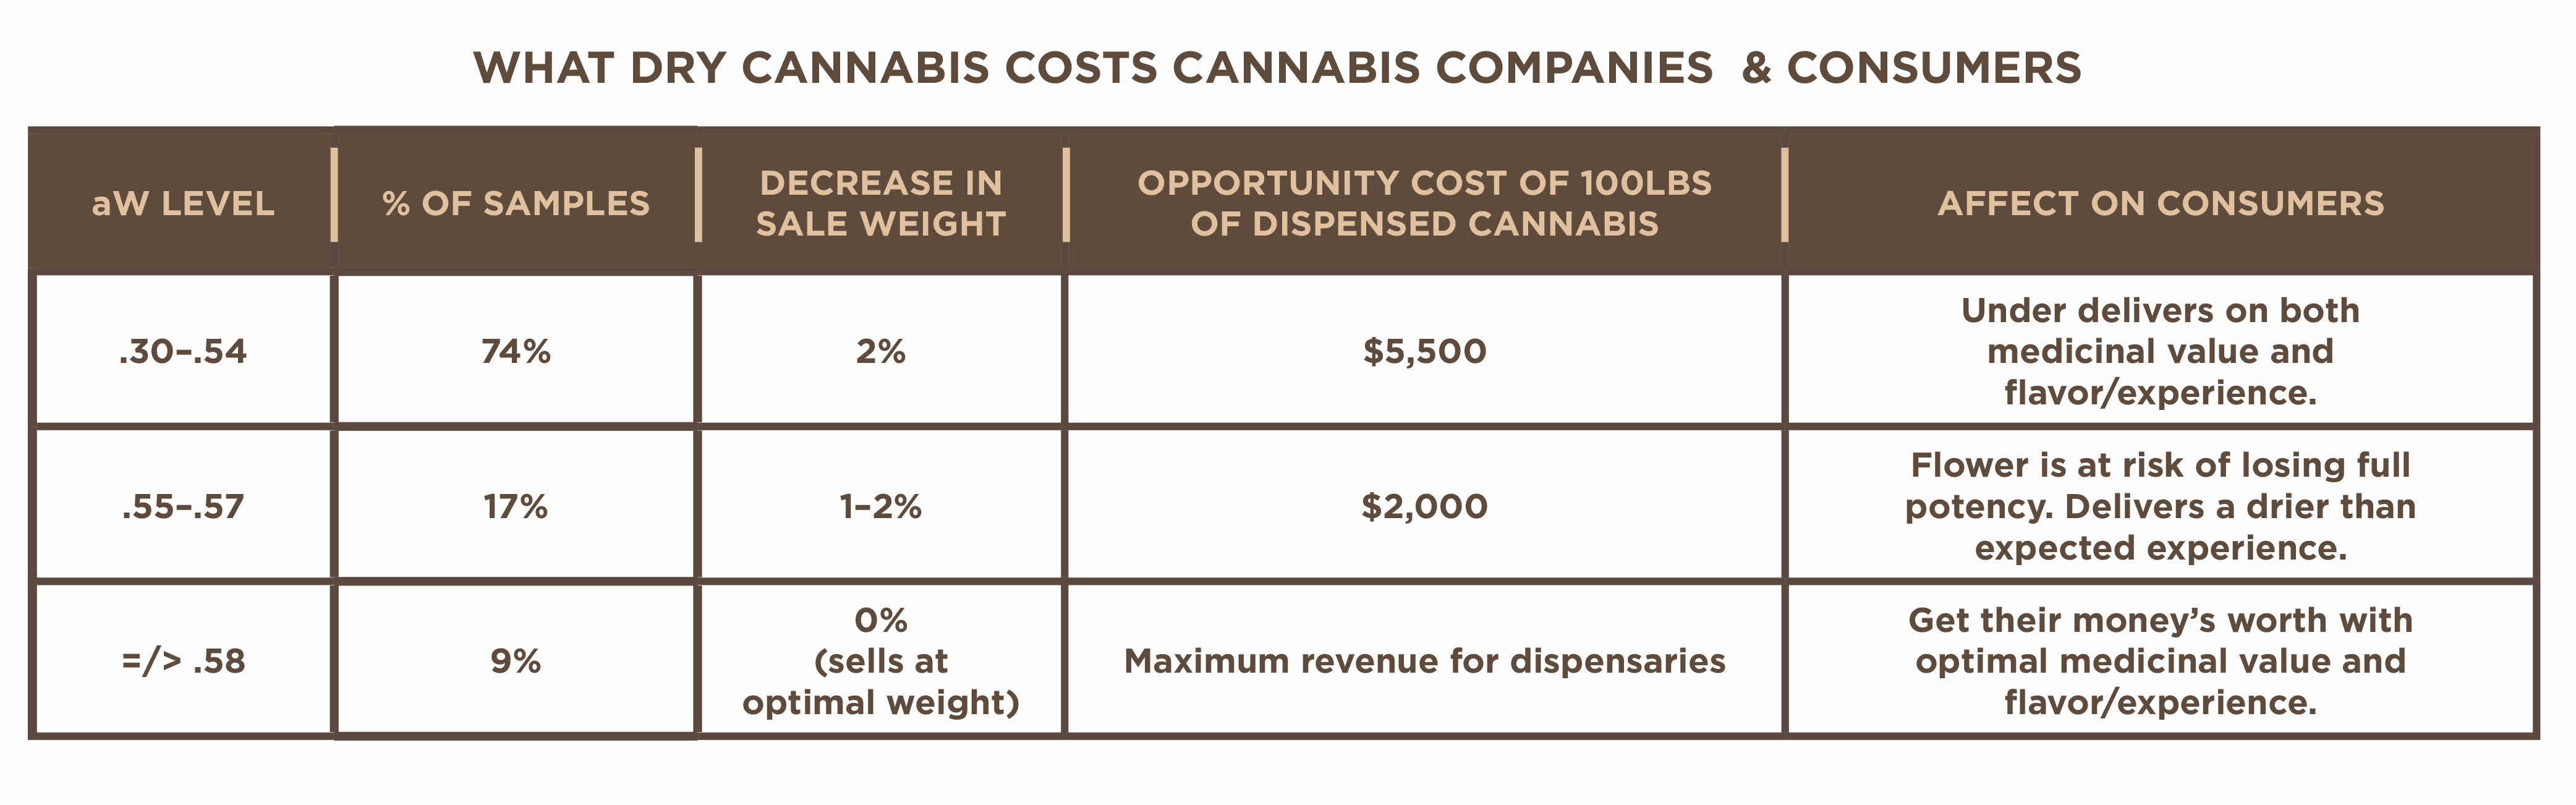 What dry cannabis costs cannabis companies & consumers.